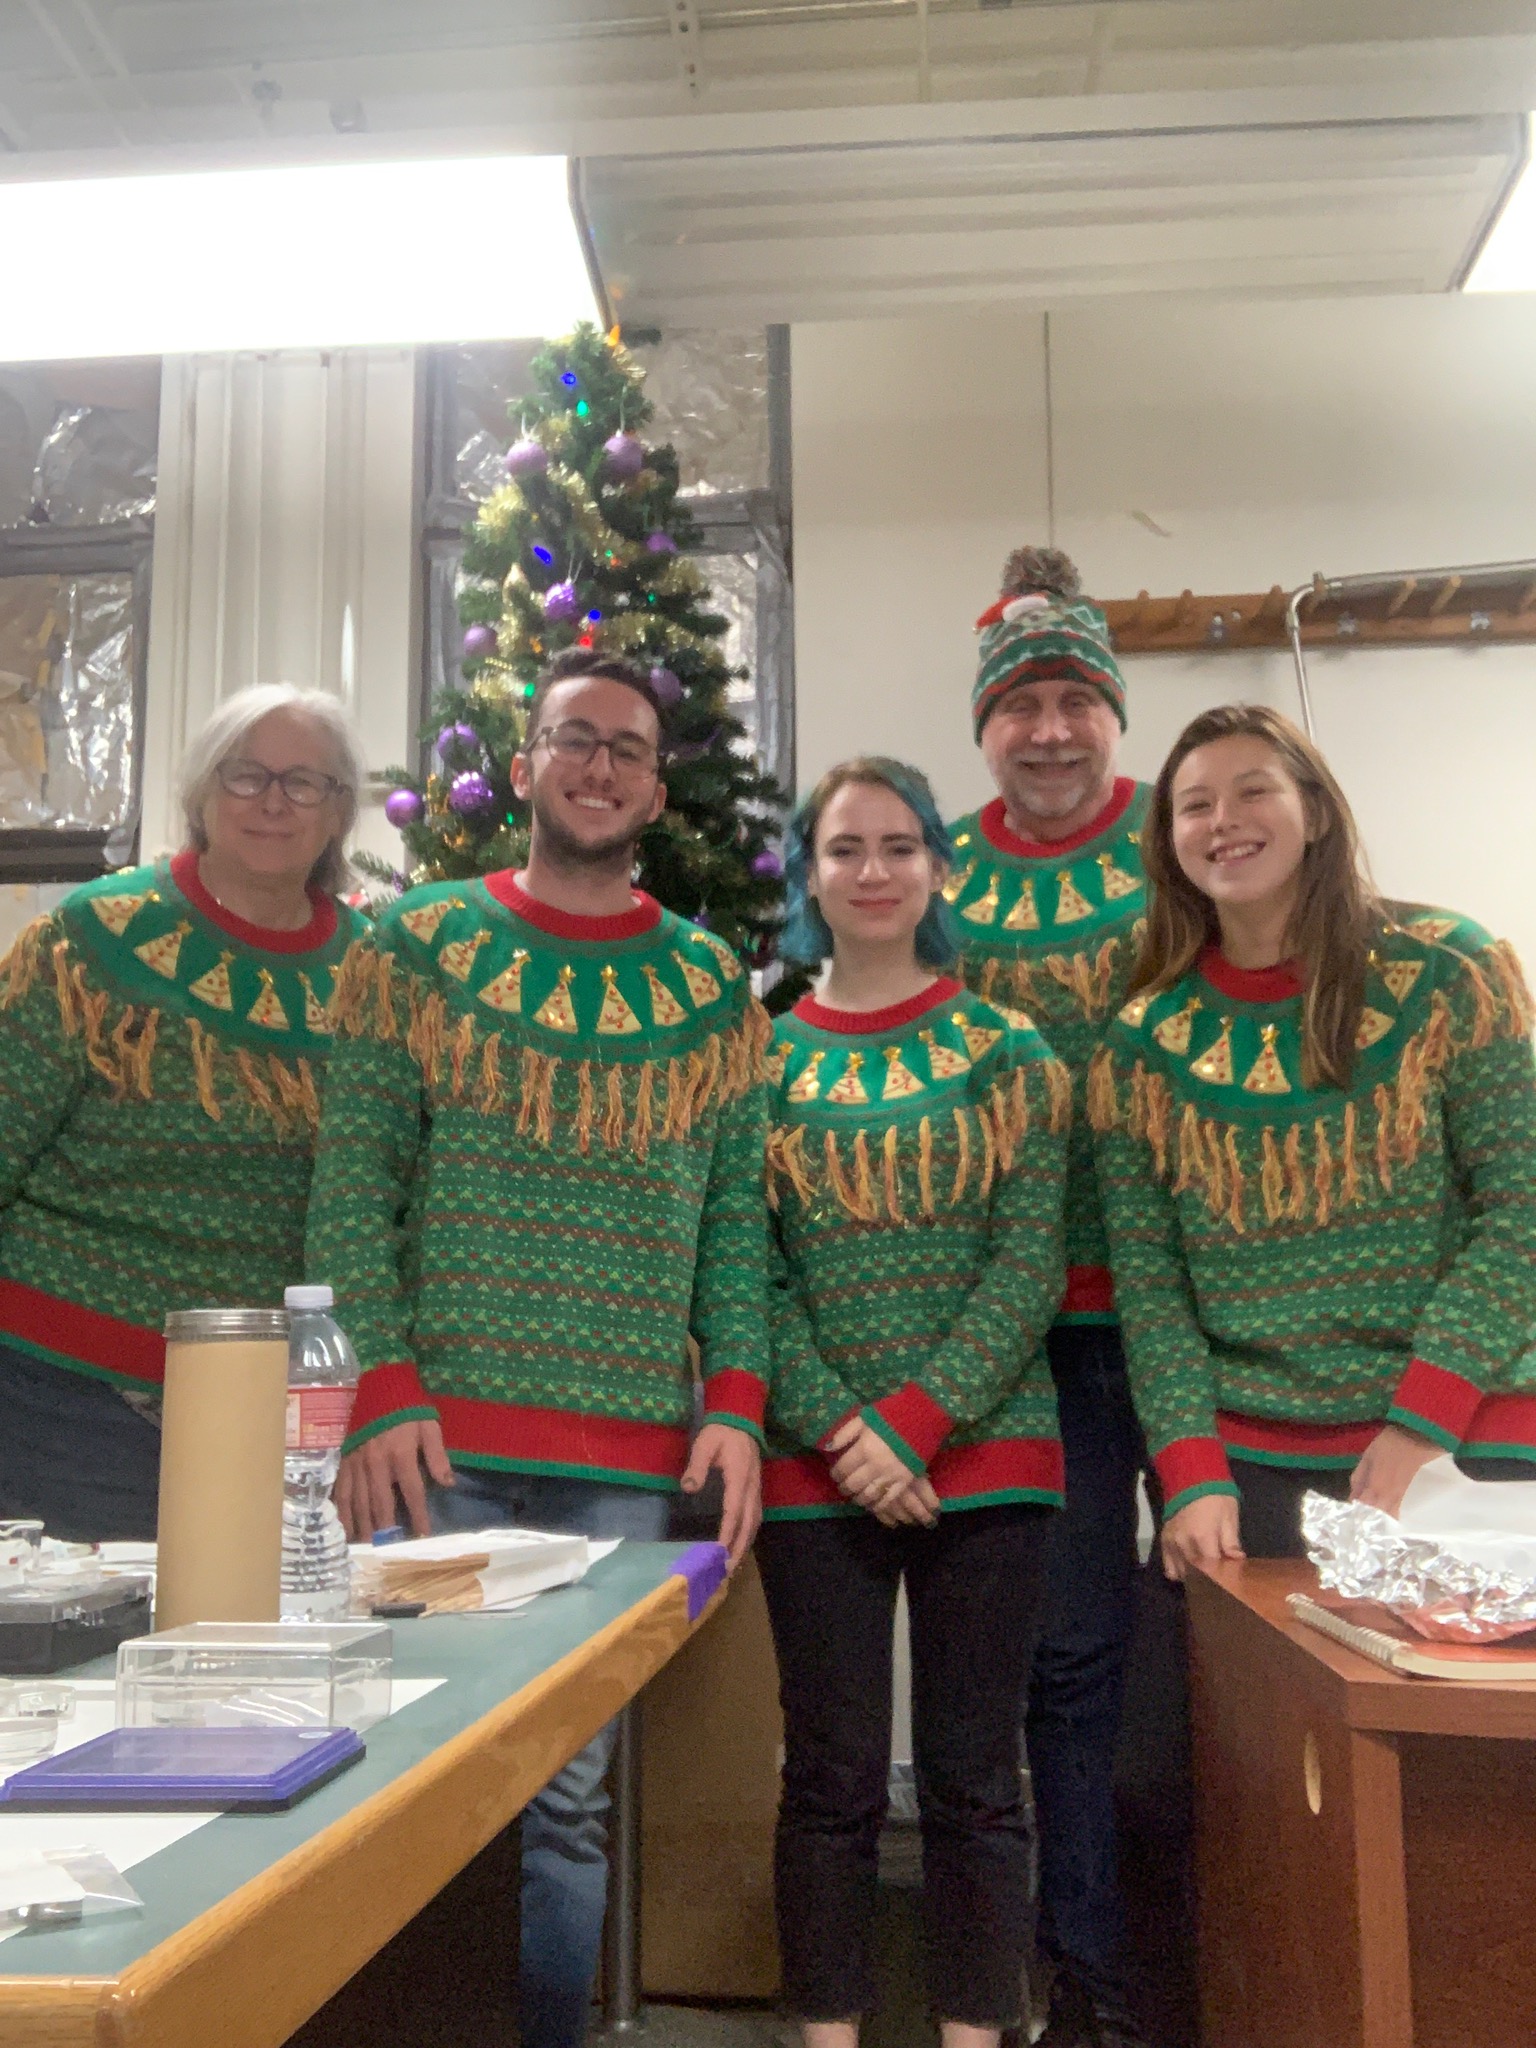 Three students and two professors wearing matching Christmas sweaters in front of a Christmas tree